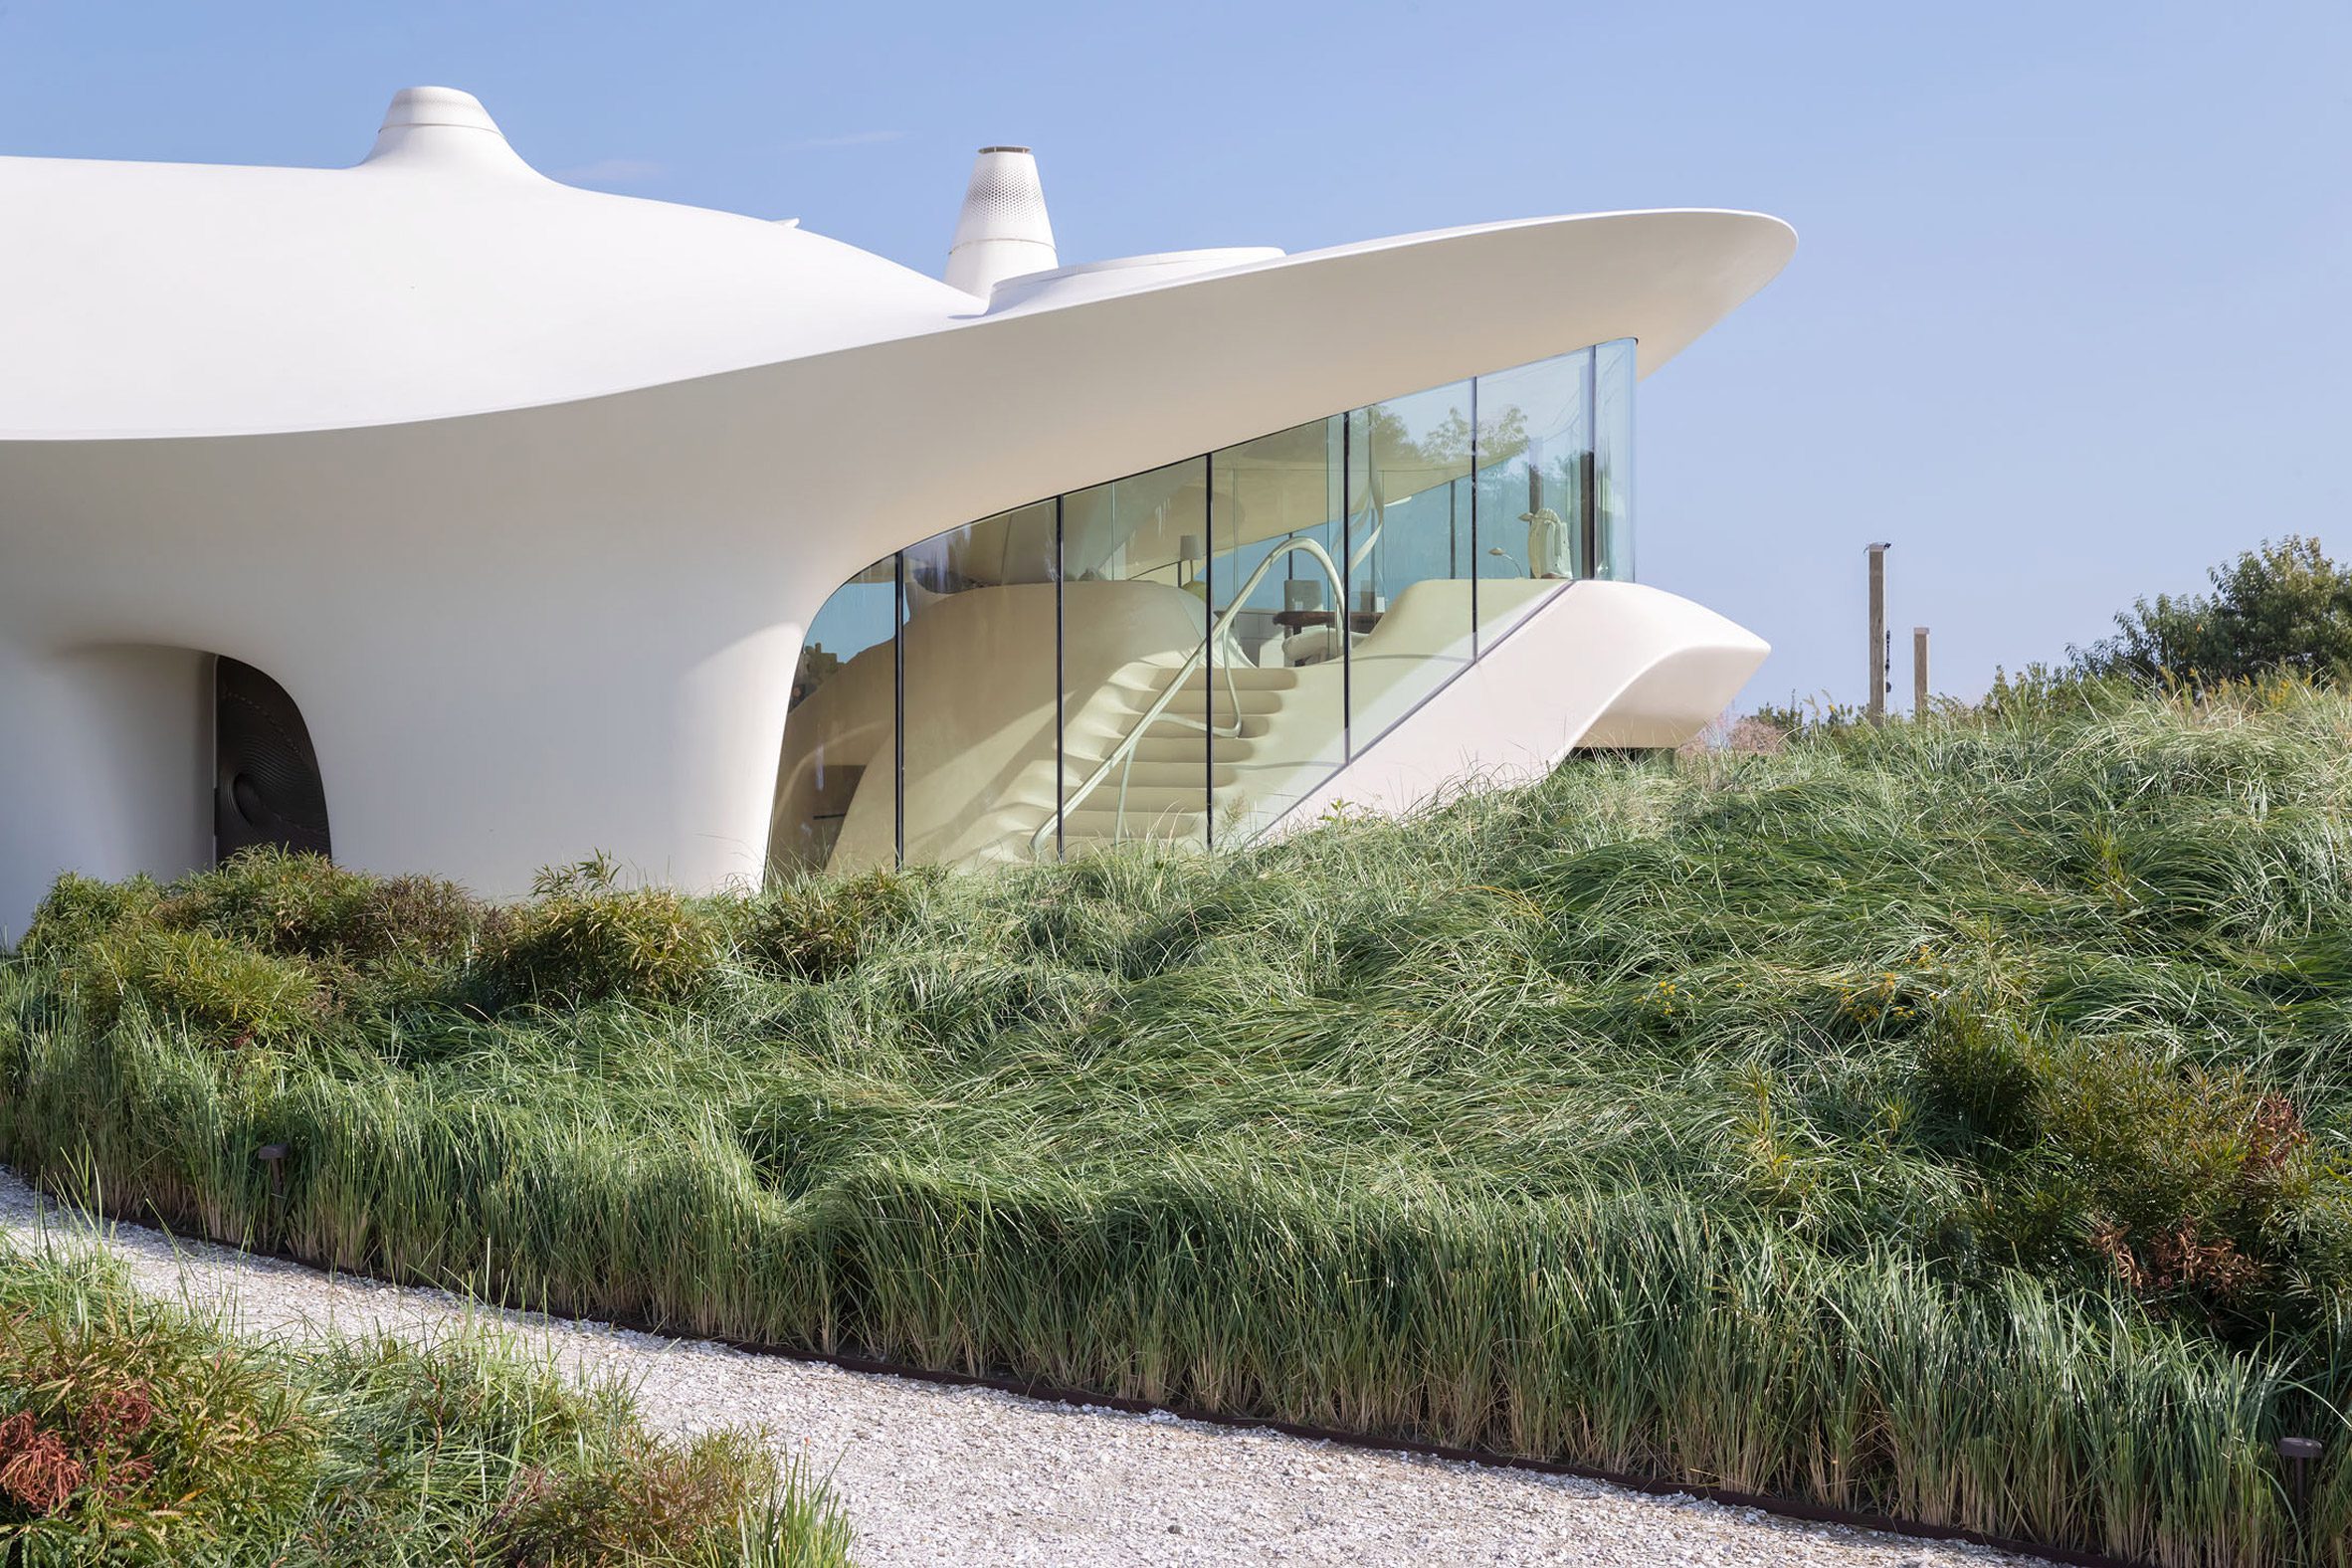 Diller Scofidio + Renfro's "surreal and magical" Blue Dream house in